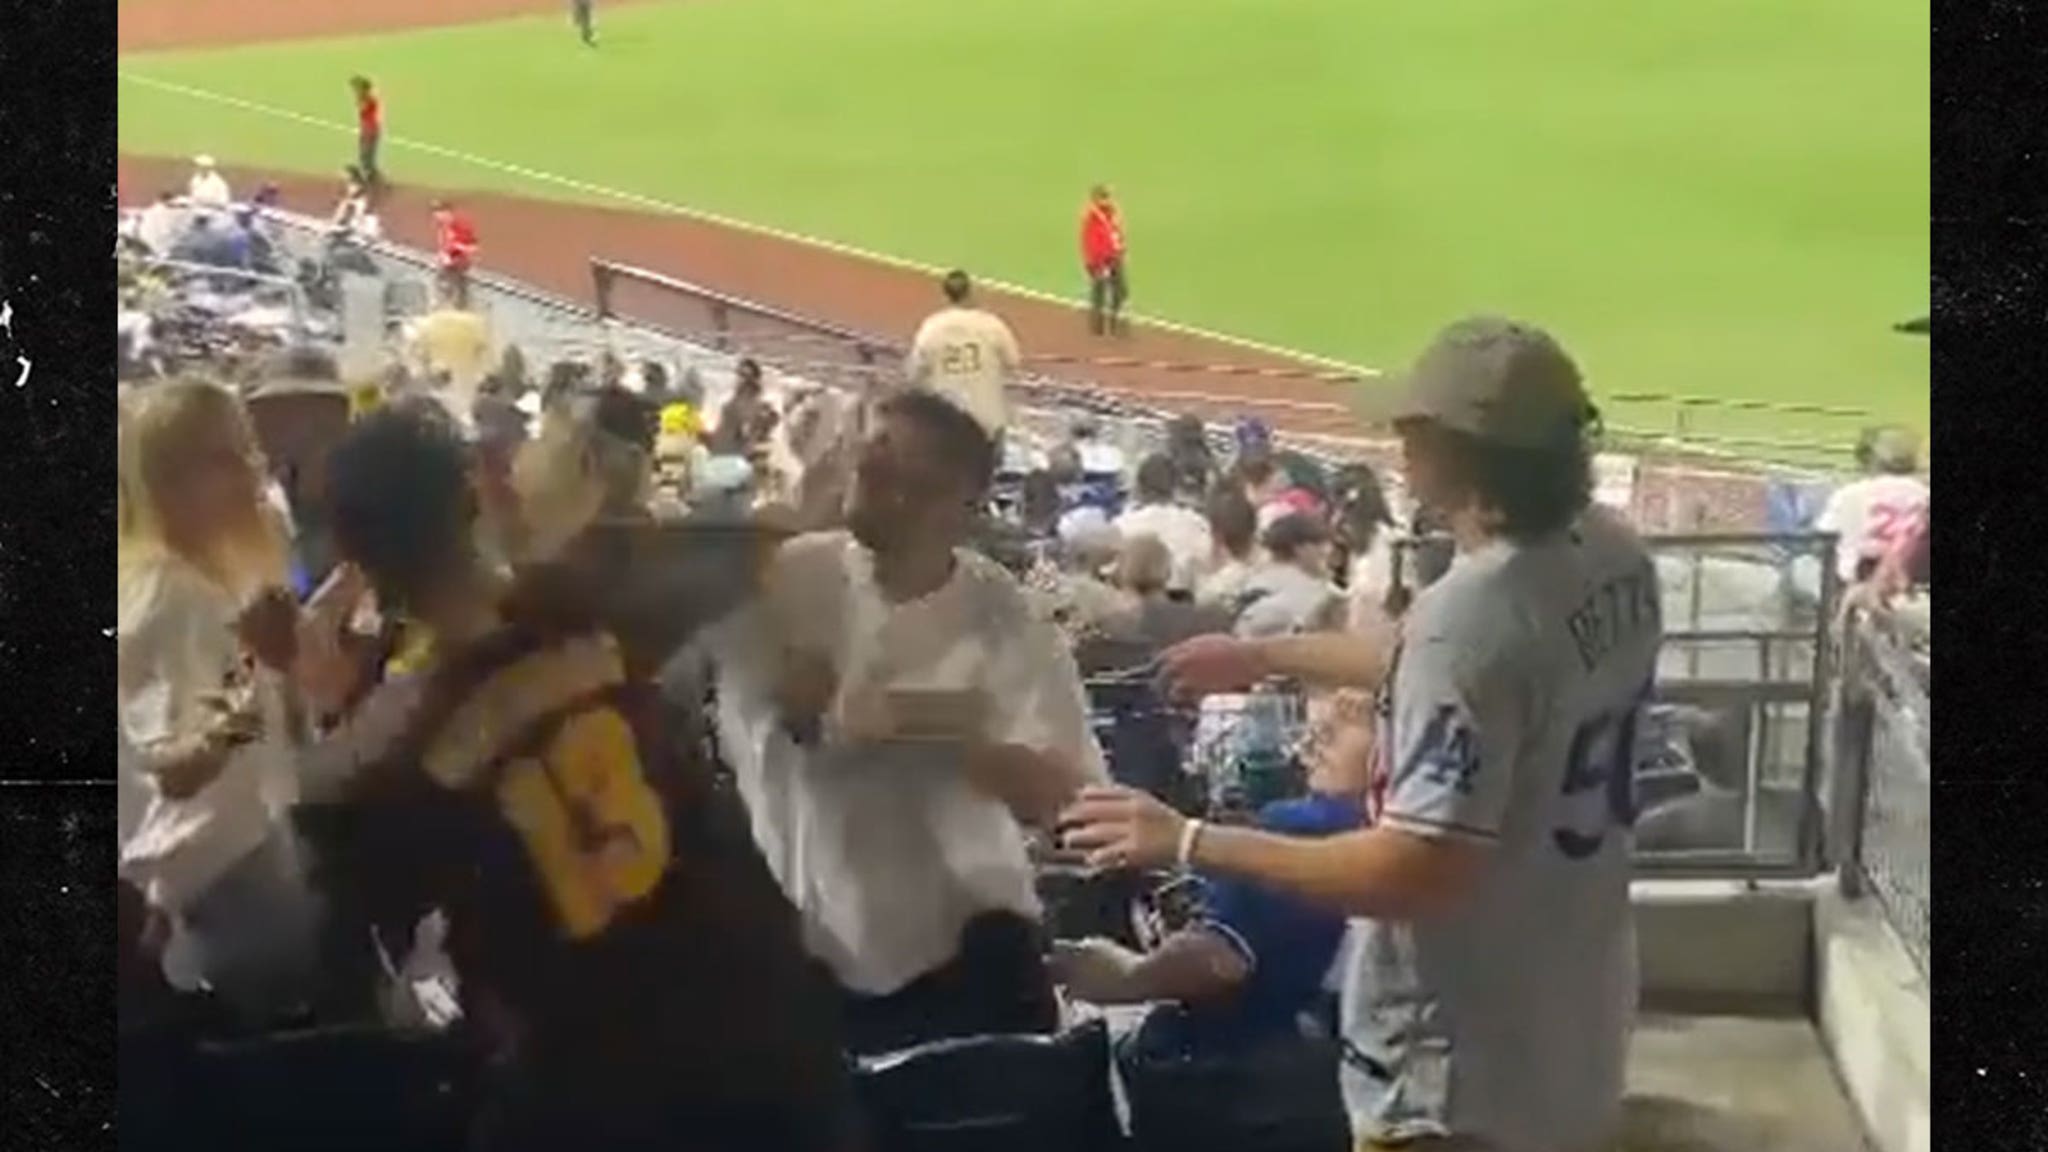 Dodgers, Padres fans brawl at Petco Park, one man bloodied